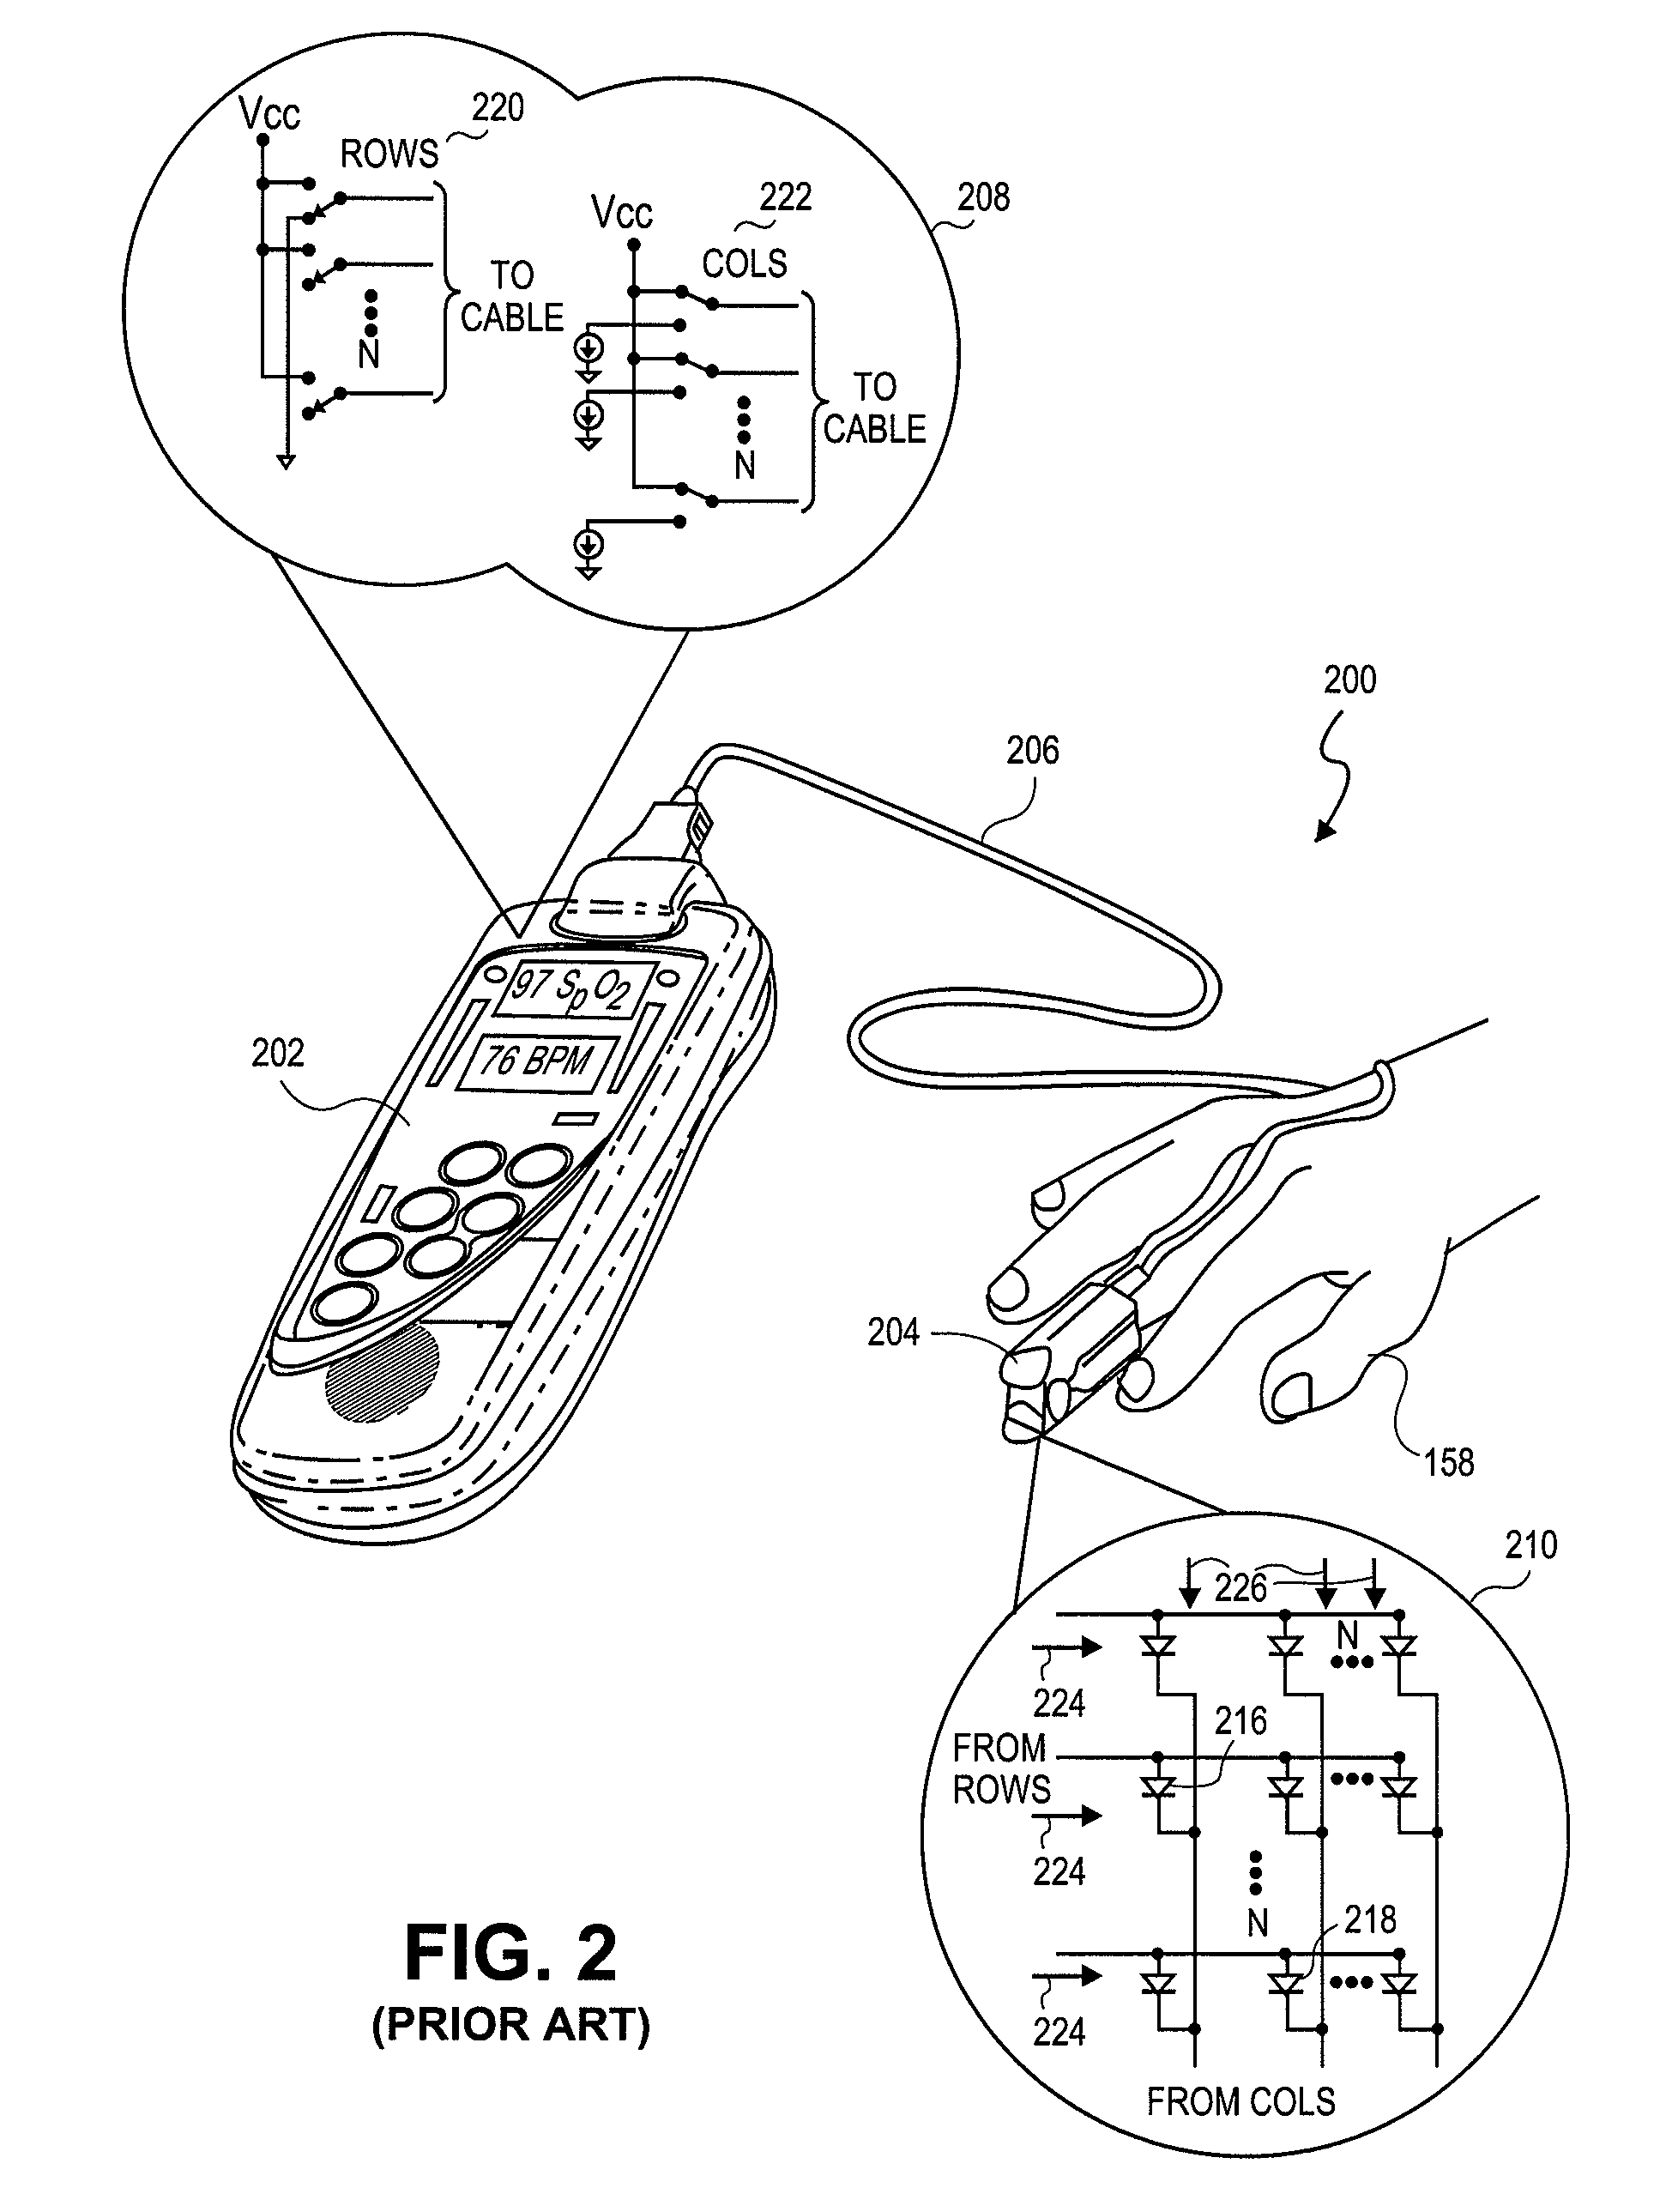 Emitter driver for noninvasive patient monitor